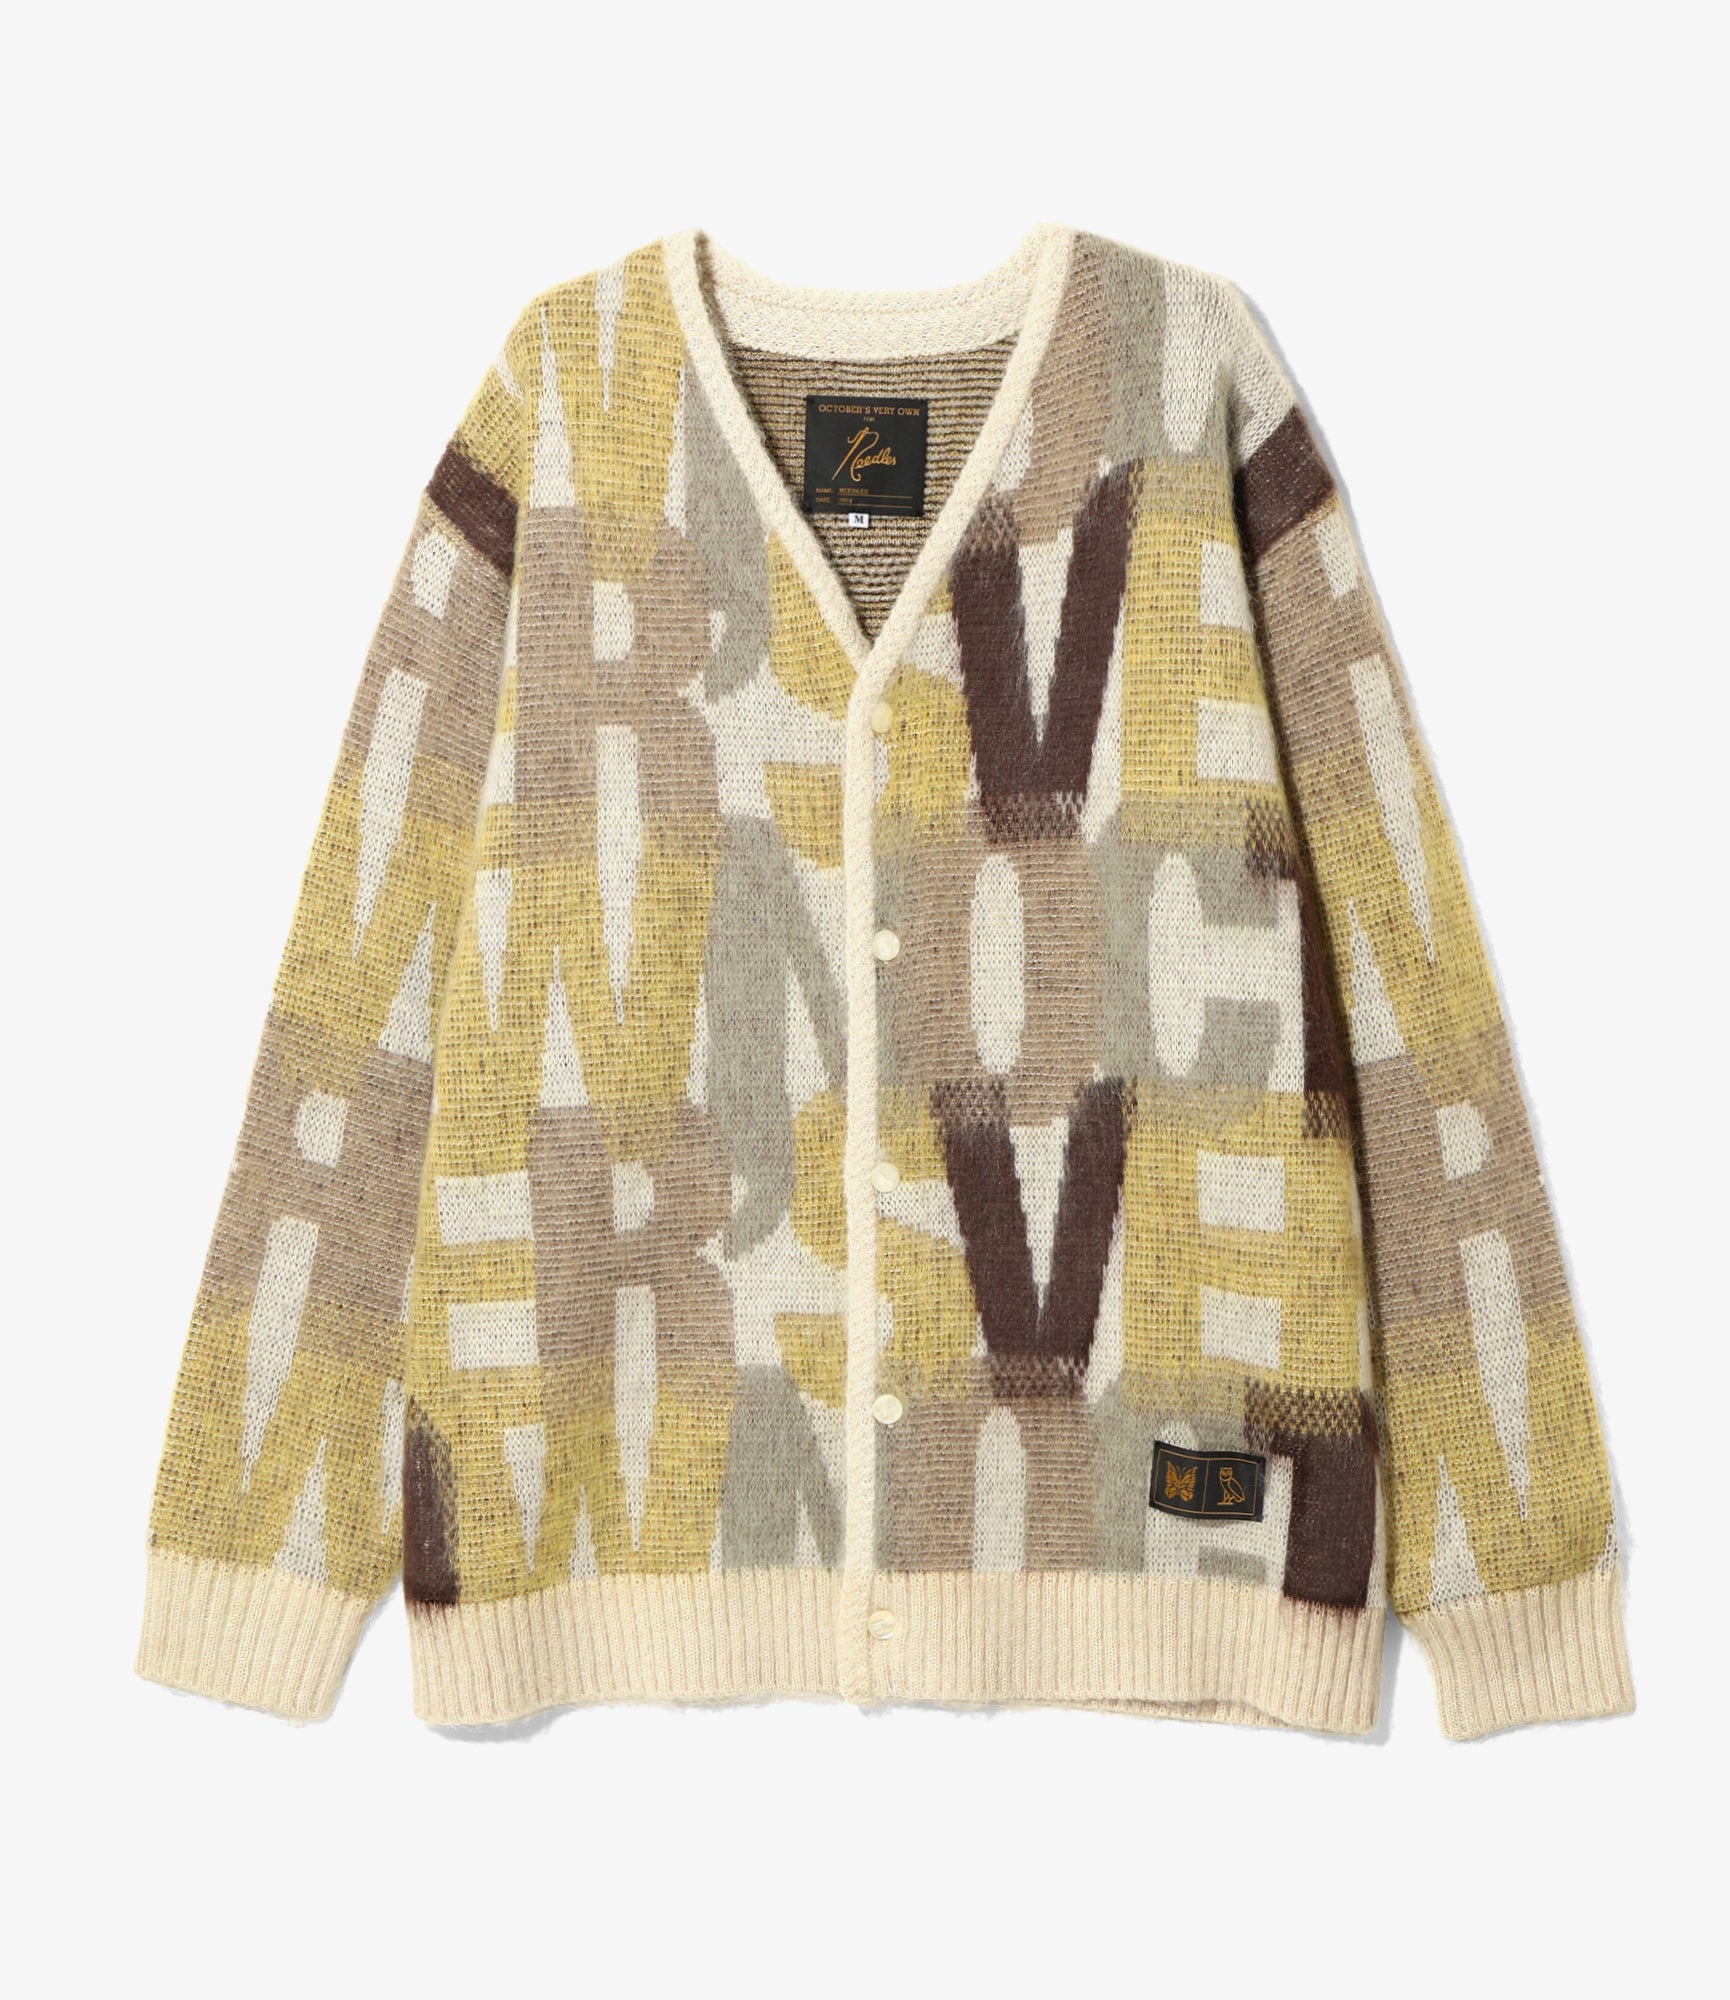 Needles x OVO Mohair Cardigan - OCTOBER'S VERY OWN - Ivory